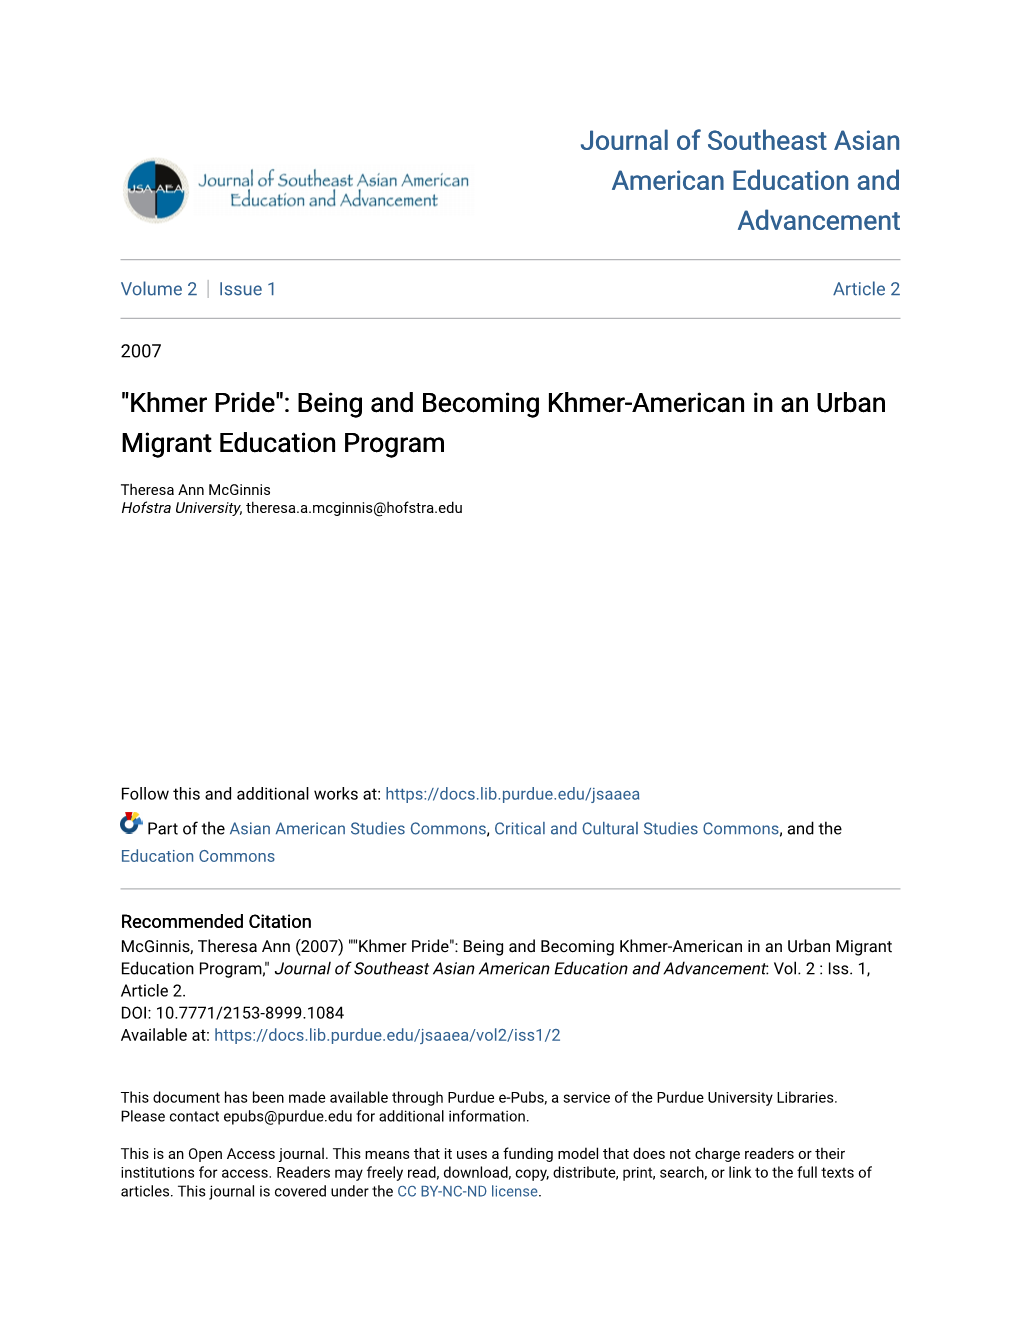 Khmer Pride": Being and Becoming Khmer-American in an Urban Migrant Education Program